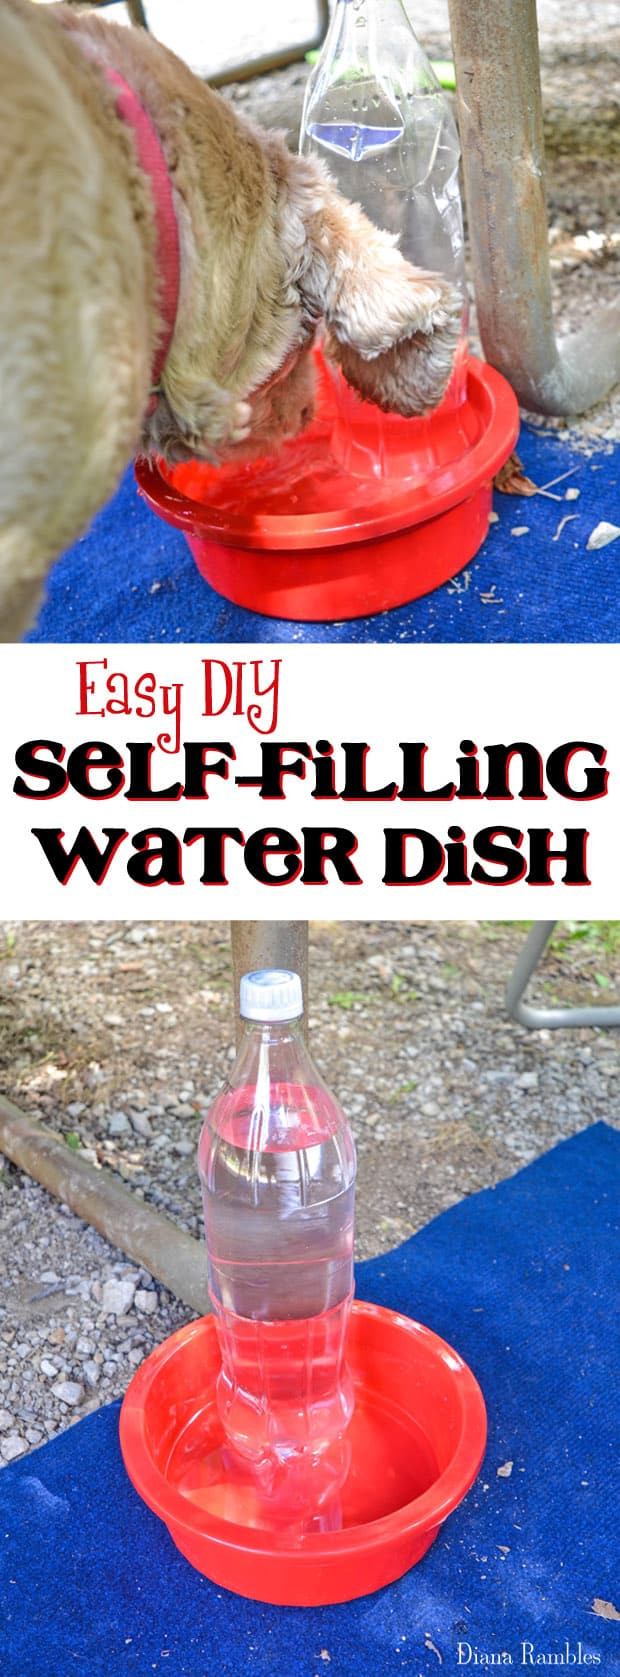 DIY Self Filling Dog Water Bowl
 Tips for Keeping Your Dog Cool While Camping in Summer